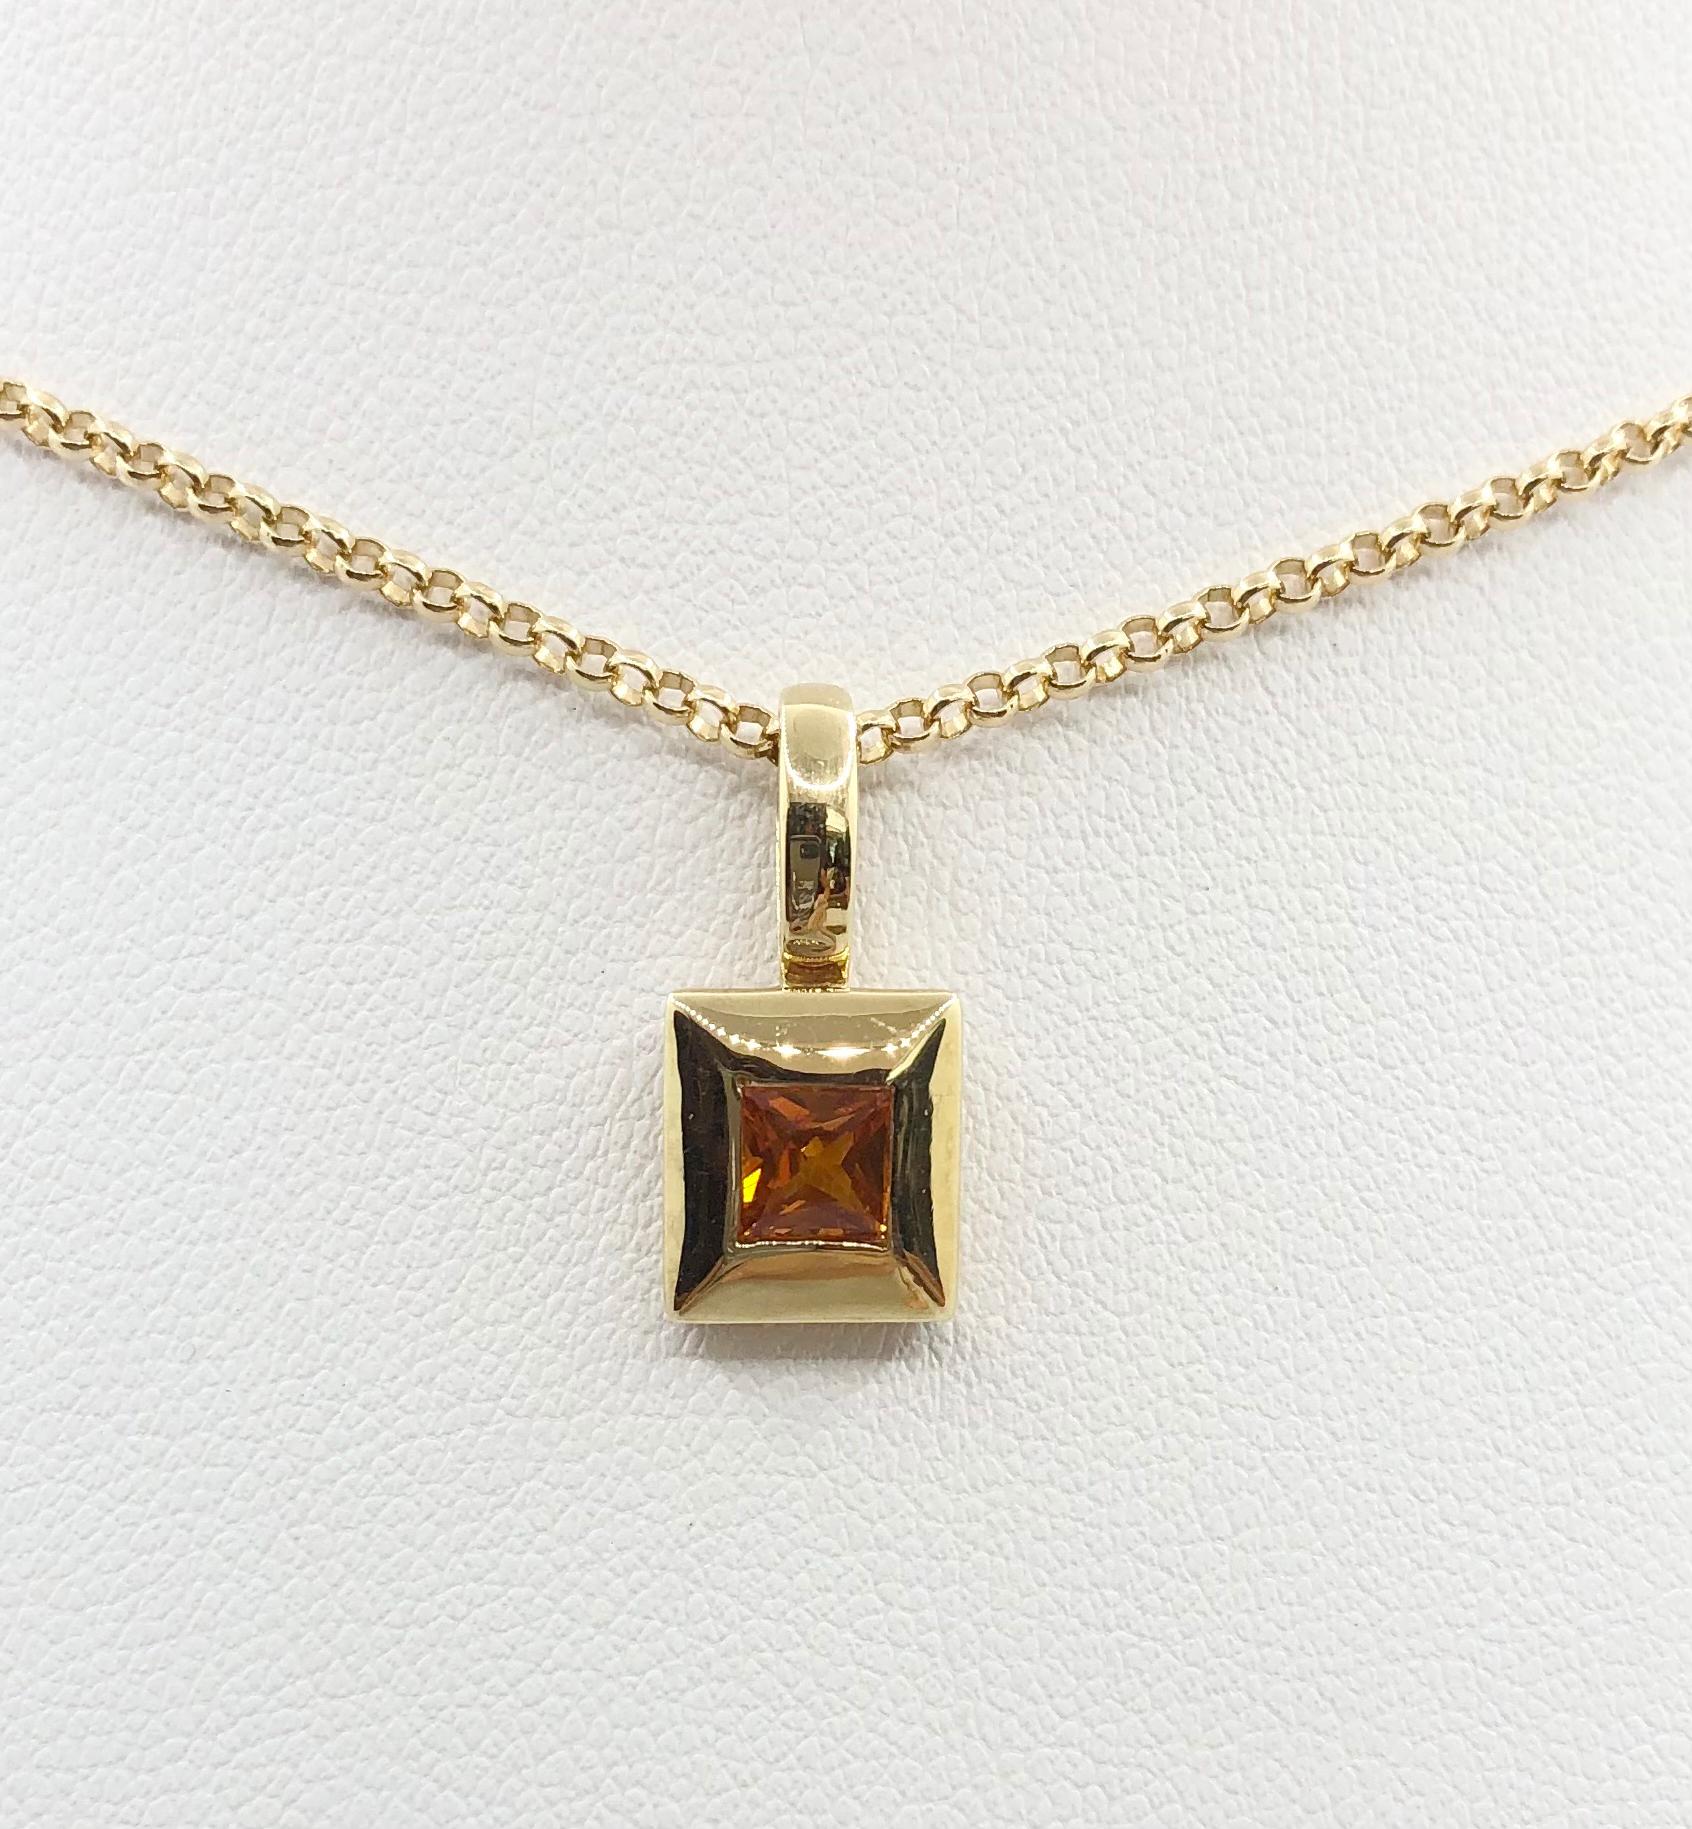 Yellow Sapphire 0.52 carat Pendant set in 18 Karat Gold Settings
(chain not included)

Width: 0.8 cm 
Length: 1.7 cm
Total Weight: 1.75 grams

